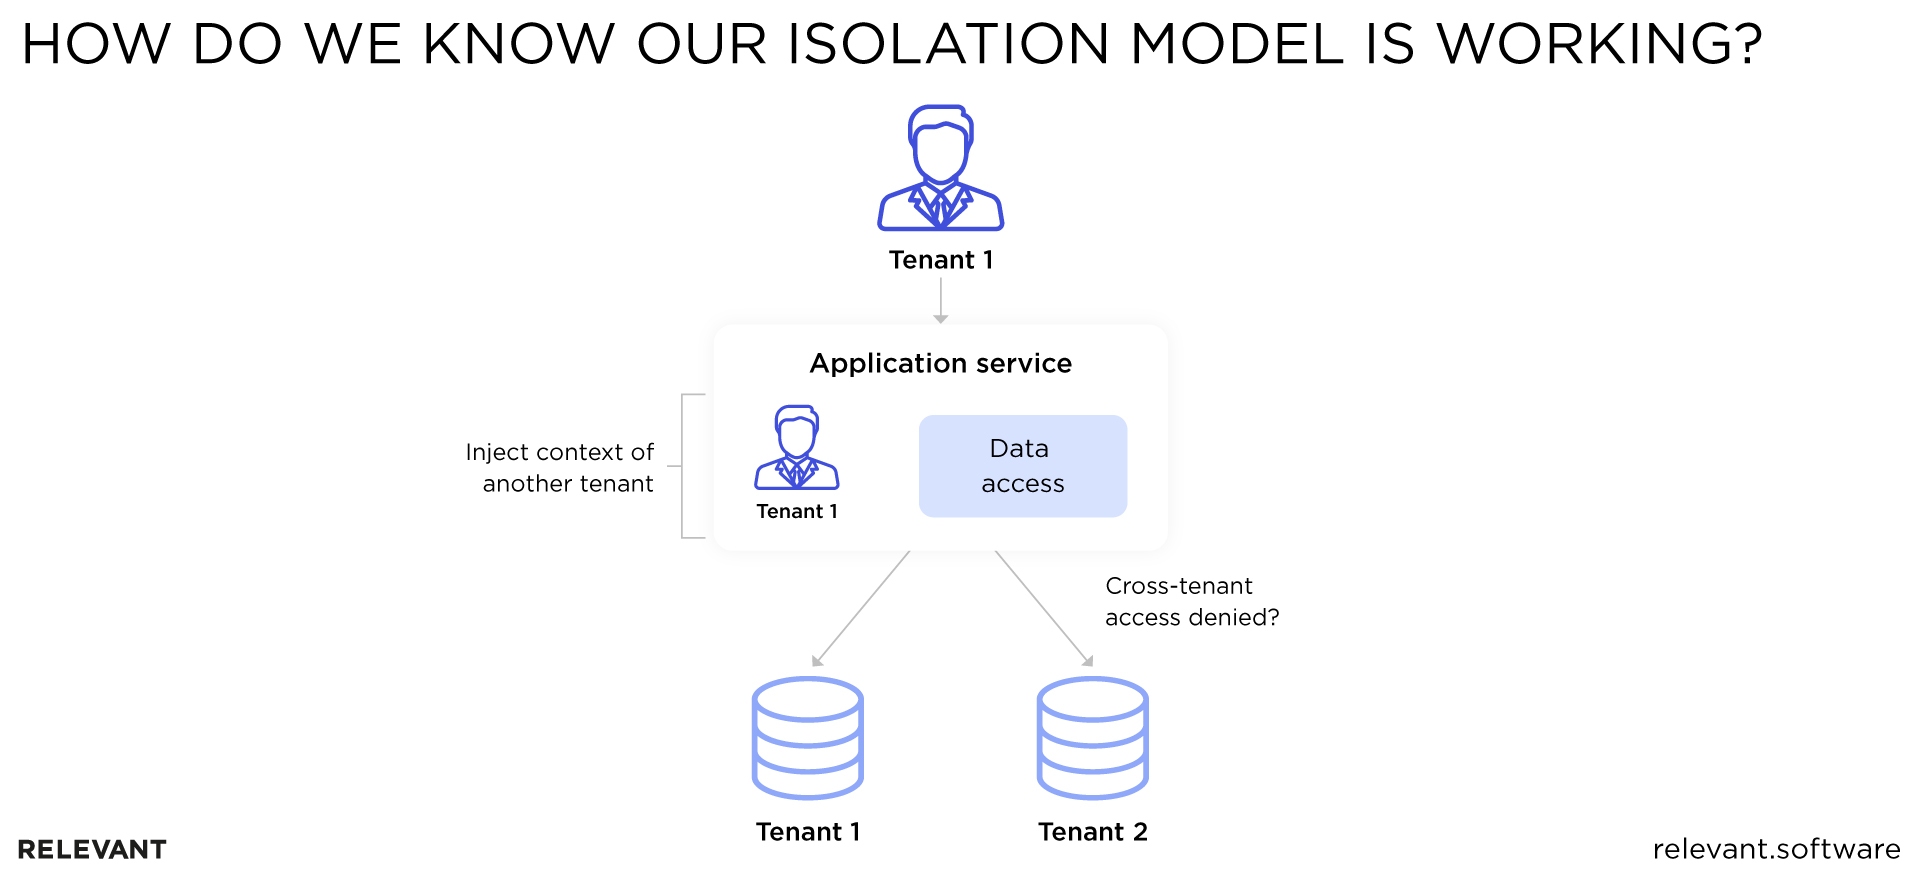 How to know if your isolation model is working